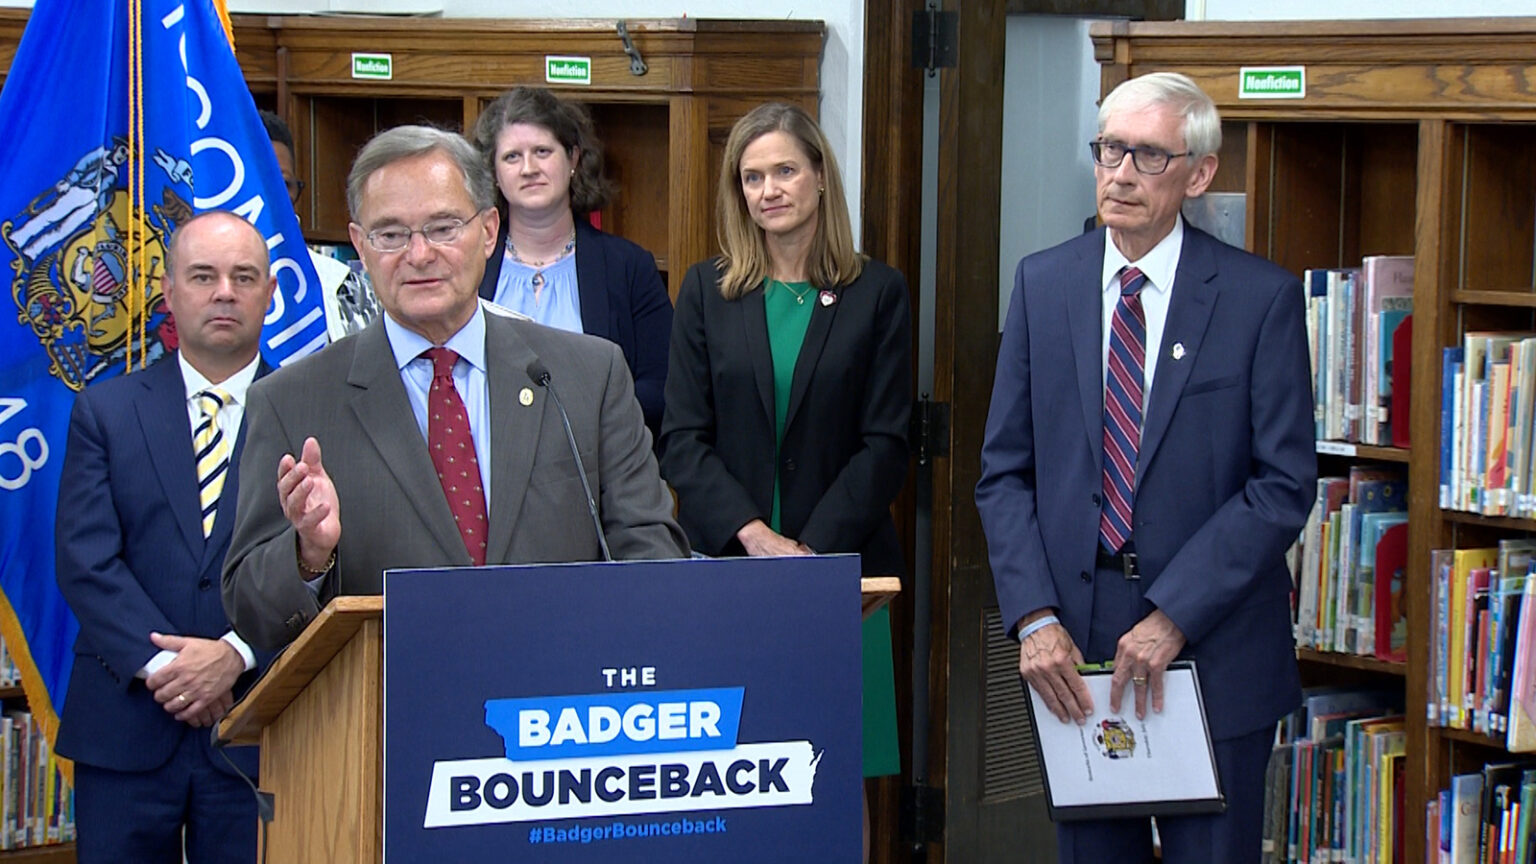 Peter Barca standing at podium in school library surrounded by Tony Evers and other members of the governor's administration